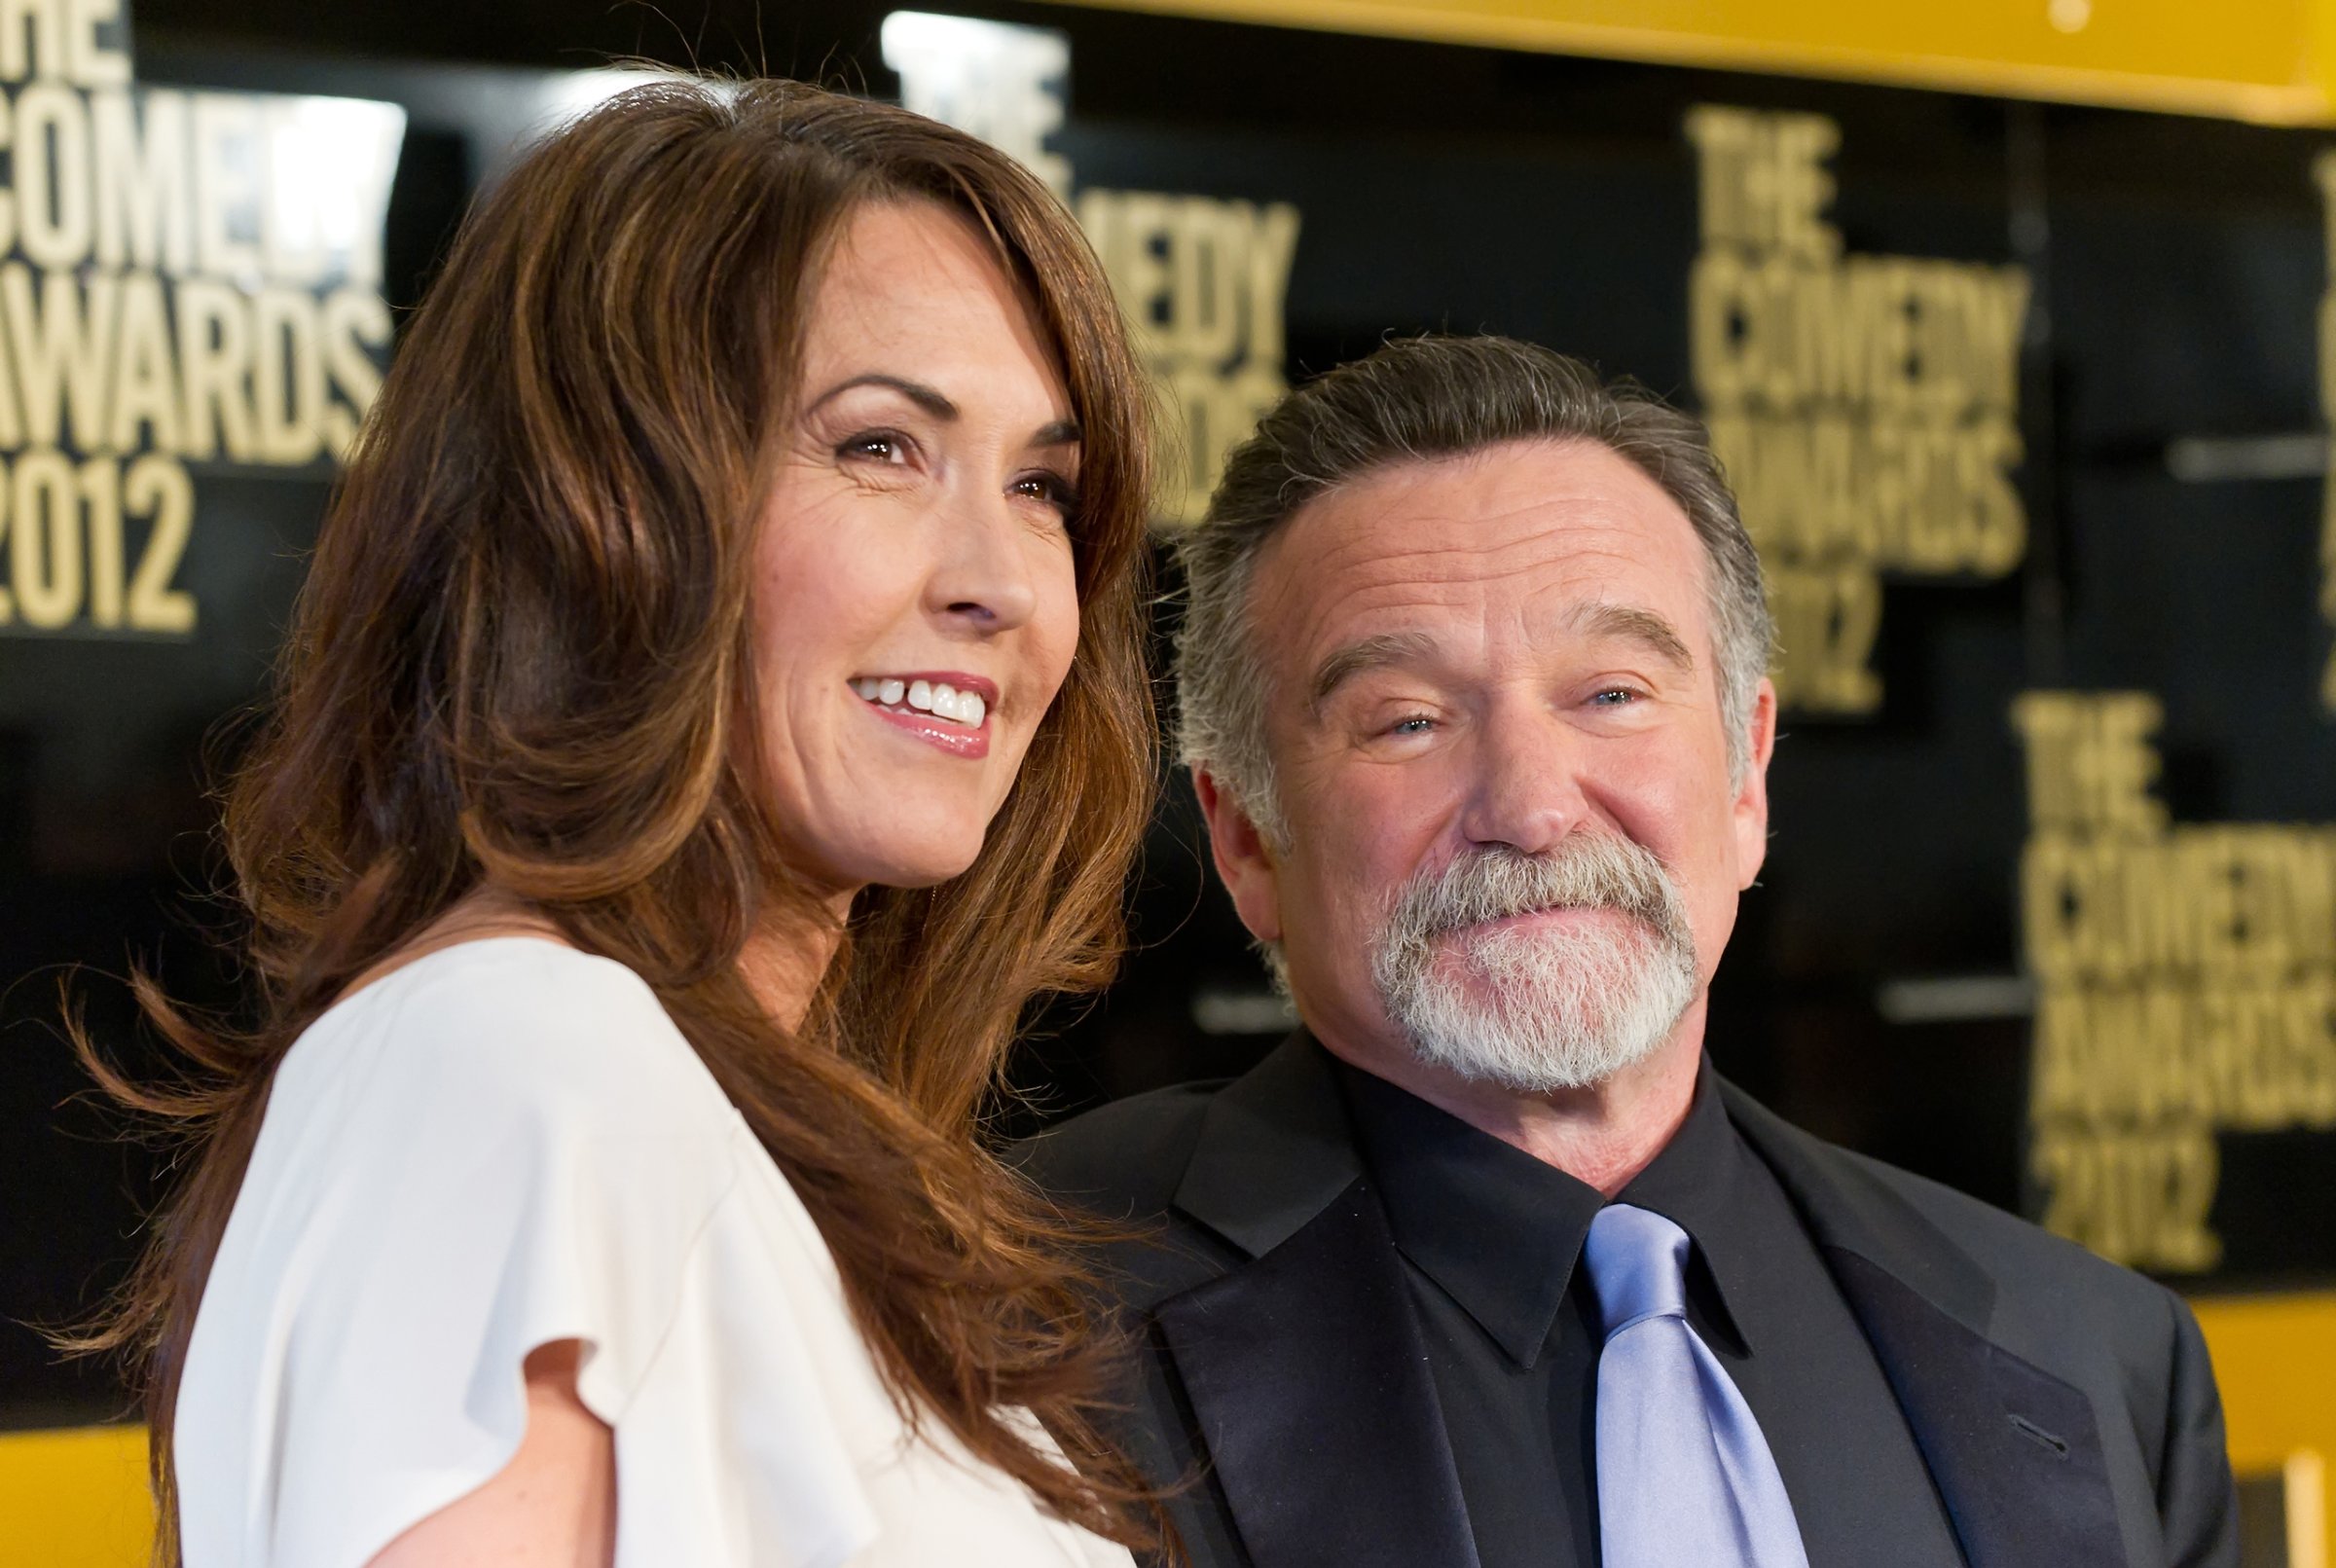 NEW YORK, NY - APRIL 28: Susan Schneider (L) and comedian Robin Williams attend The Comedy Awards 2012 at Hammerstein Ballroom on April 28, 2012 in New York City. (Photo by Gilbert Carrasquillo/FilmMagic)